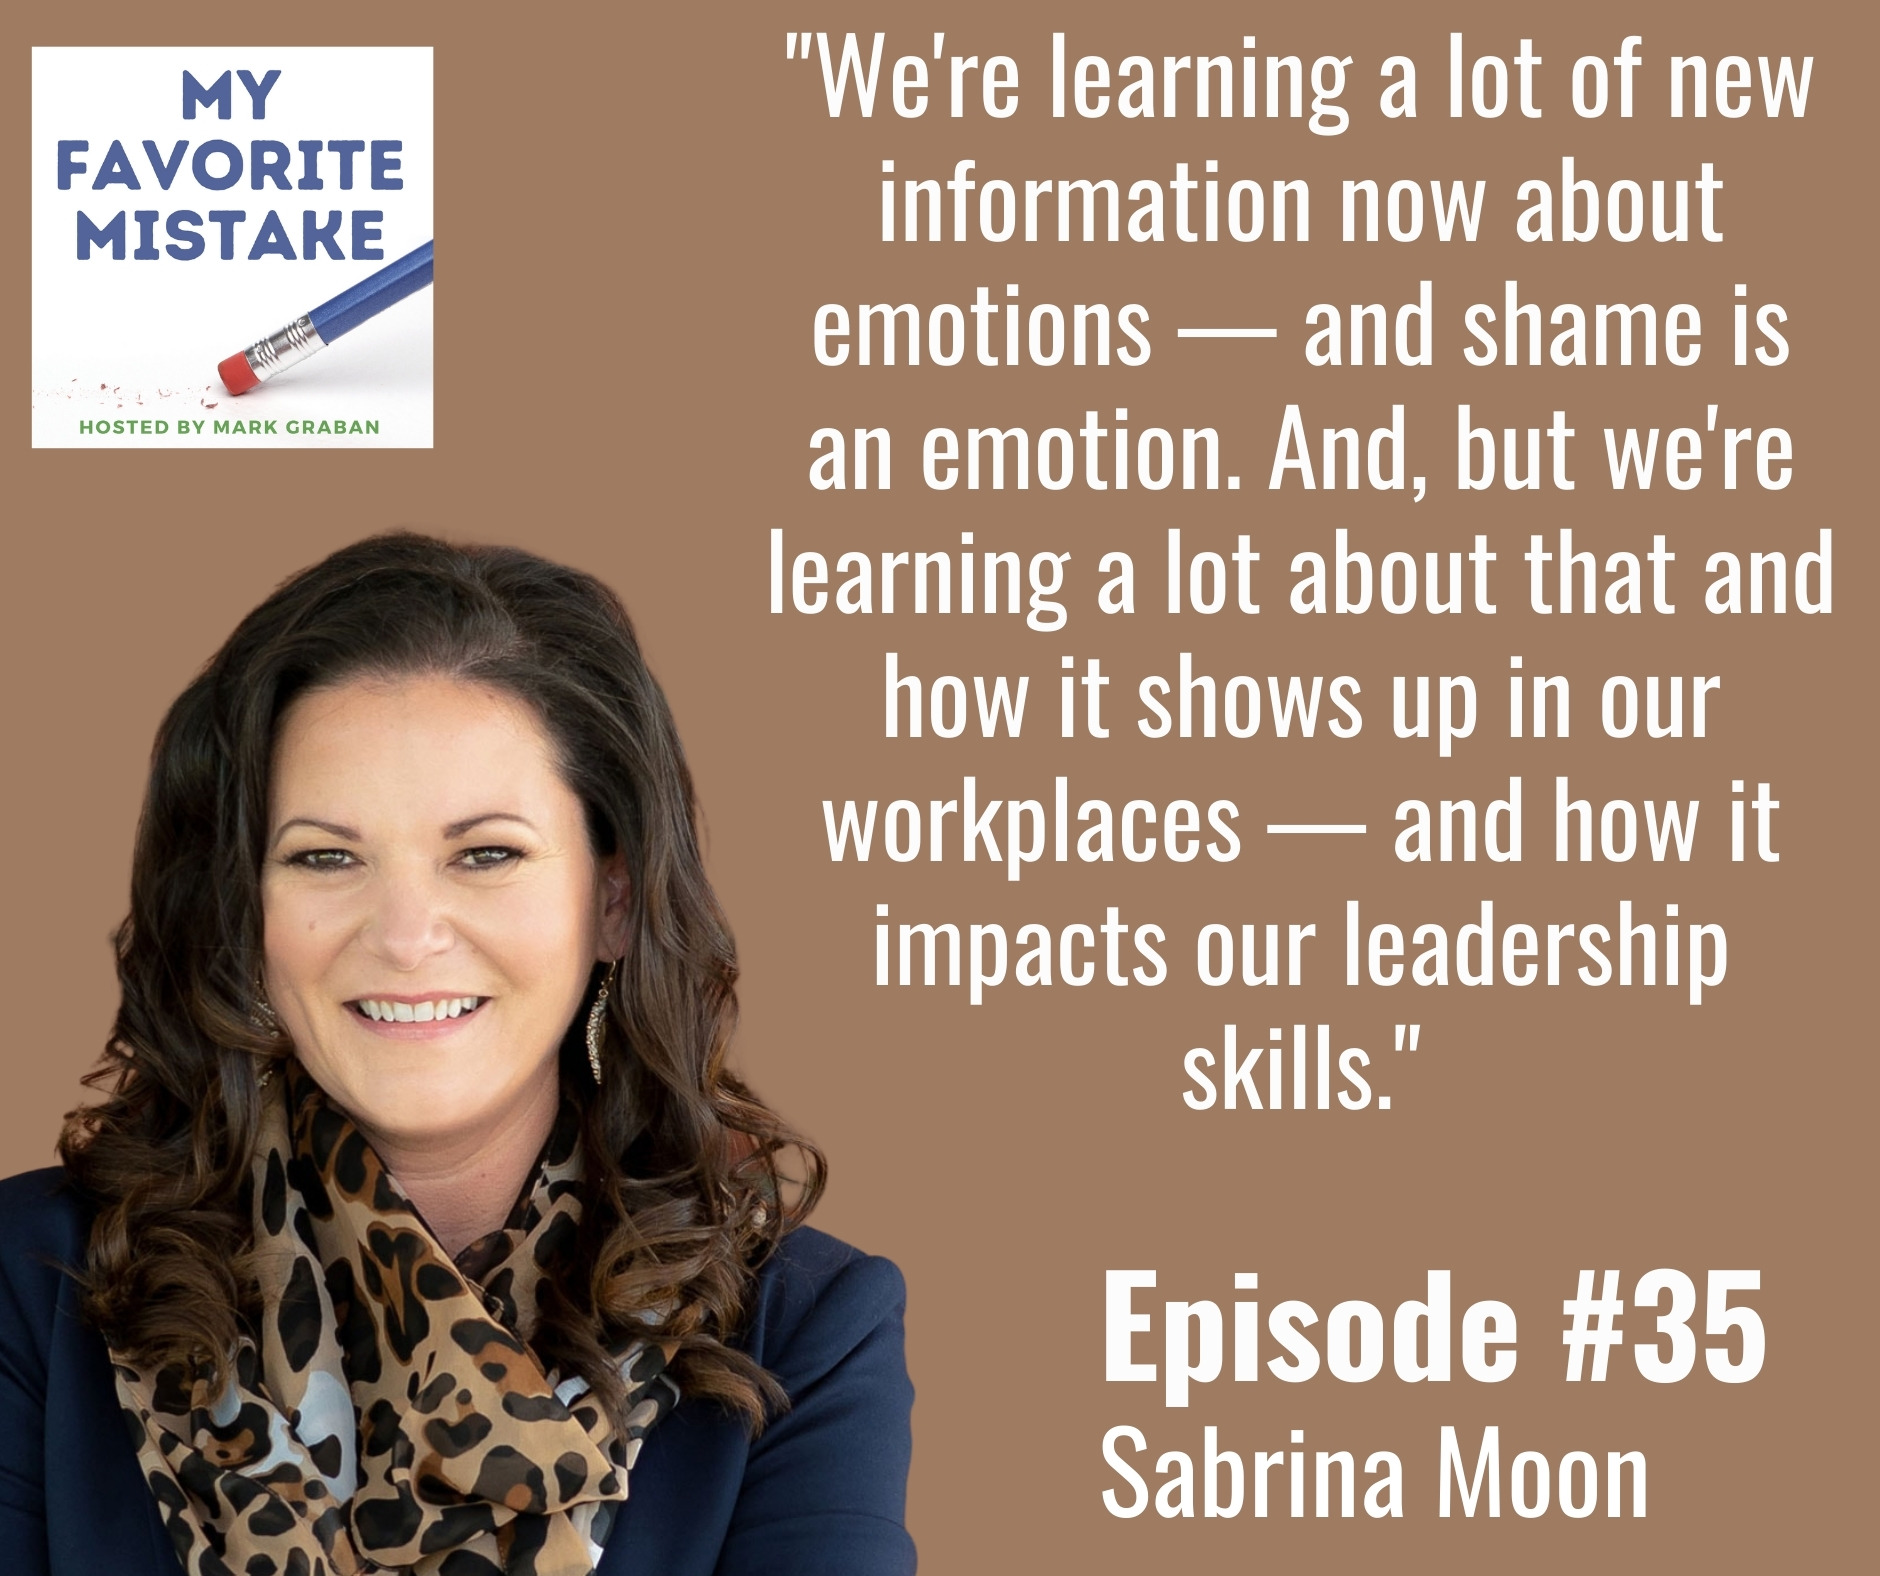 "We're learning a lot of new information now about emotions — and shame is an emotion. And, but we're learning a lot about that and how it shows up in our workplaces — and how it impacts our leadership skills."